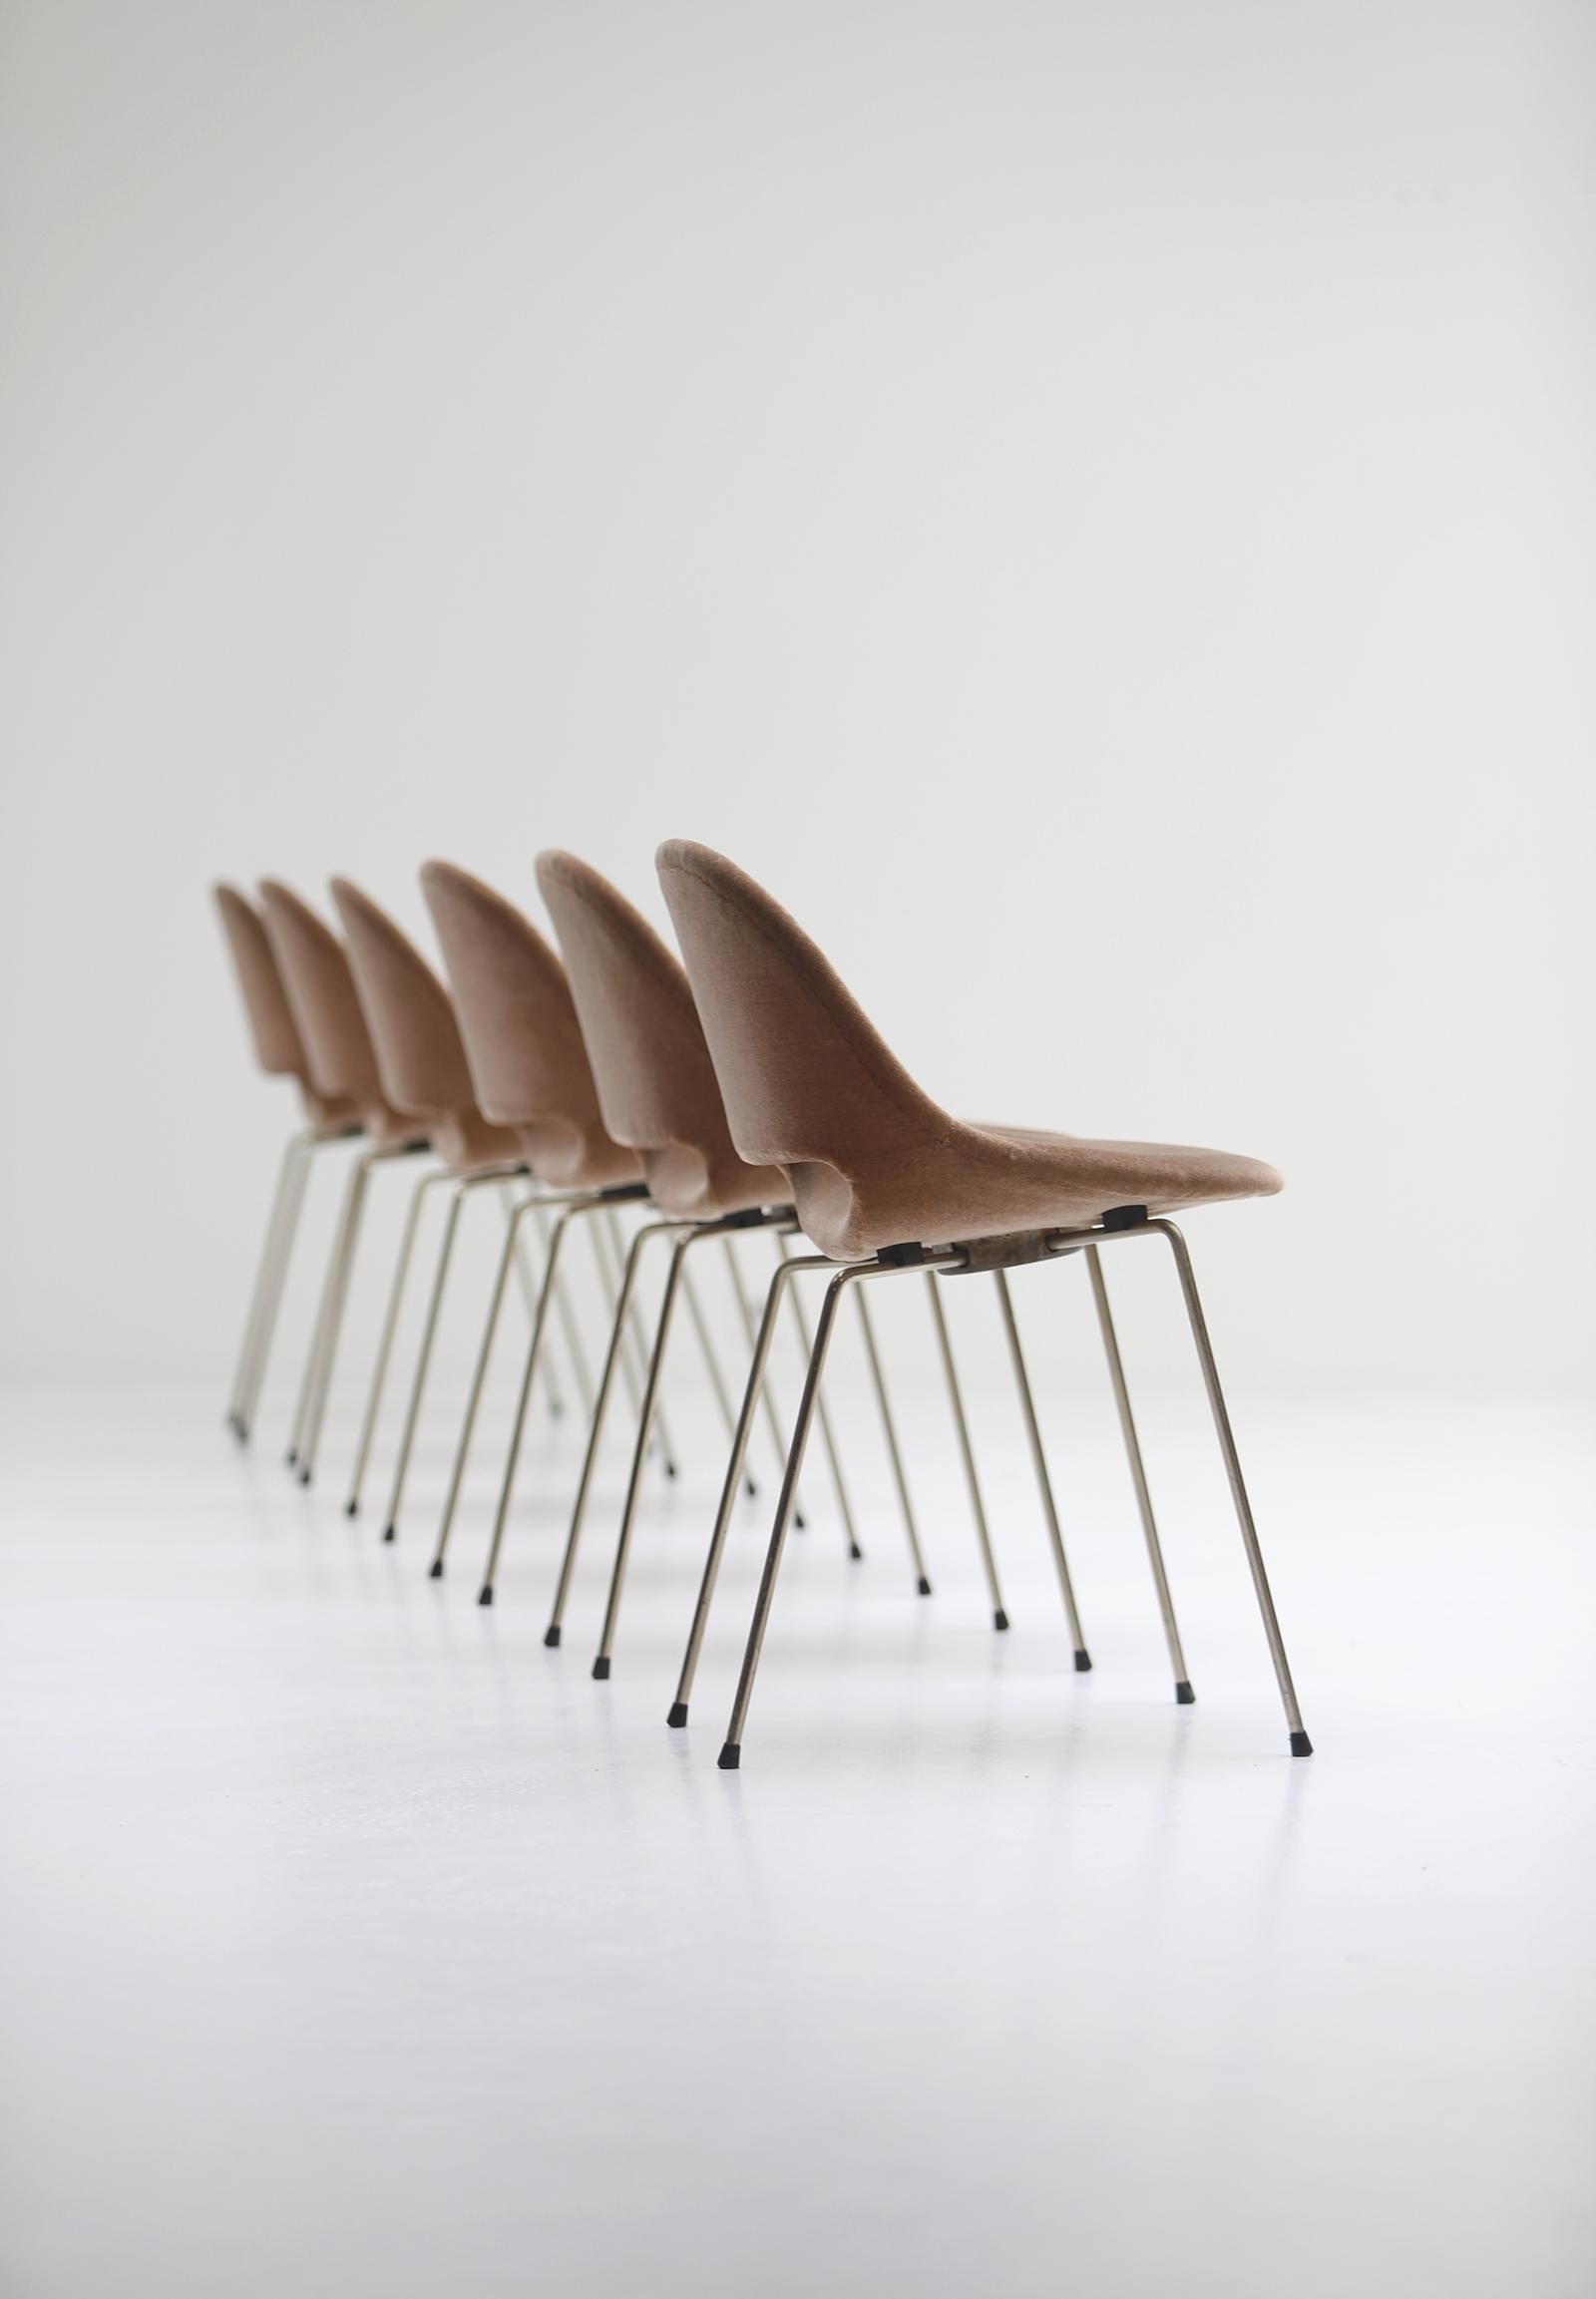 Metal Set of 6 SL58 Dining Chairs by Léon Stynen, 1950s For Sale